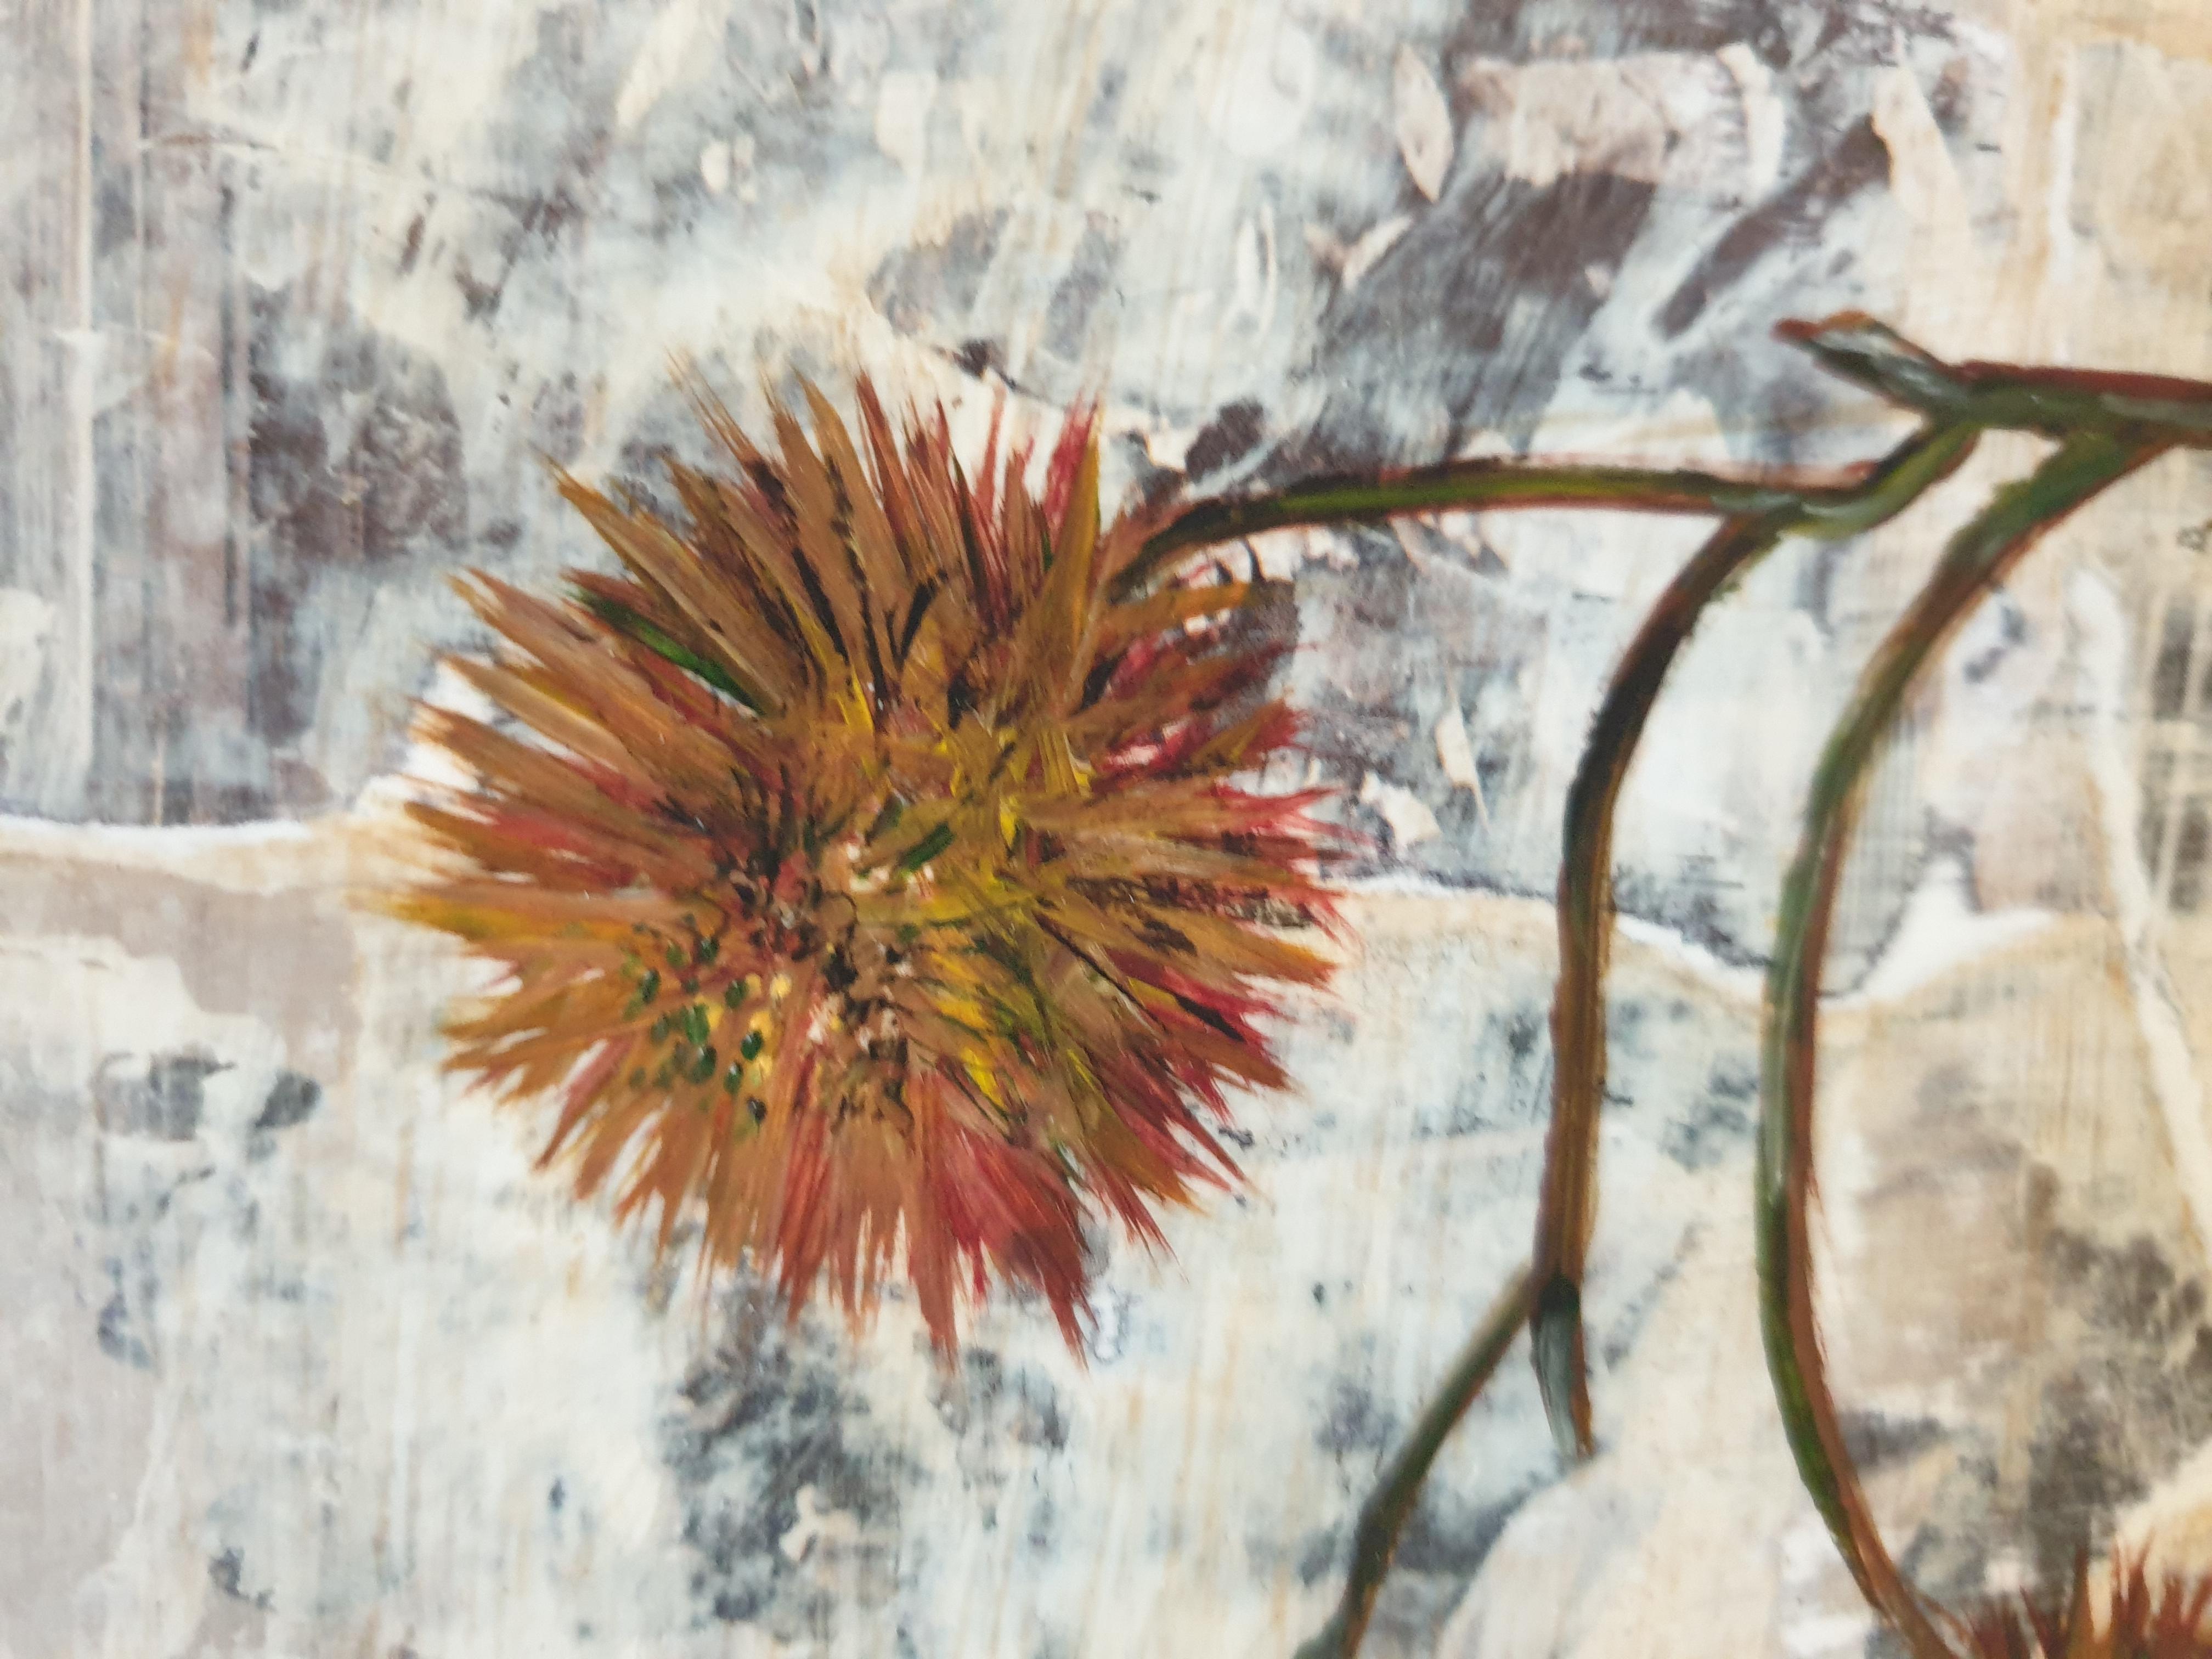 Gomphrena. Botanical Study, Découpage, Acrylic, Oil and Mixed-media on Board. - Contemporary Mixed Media Art by Menno Modderman 